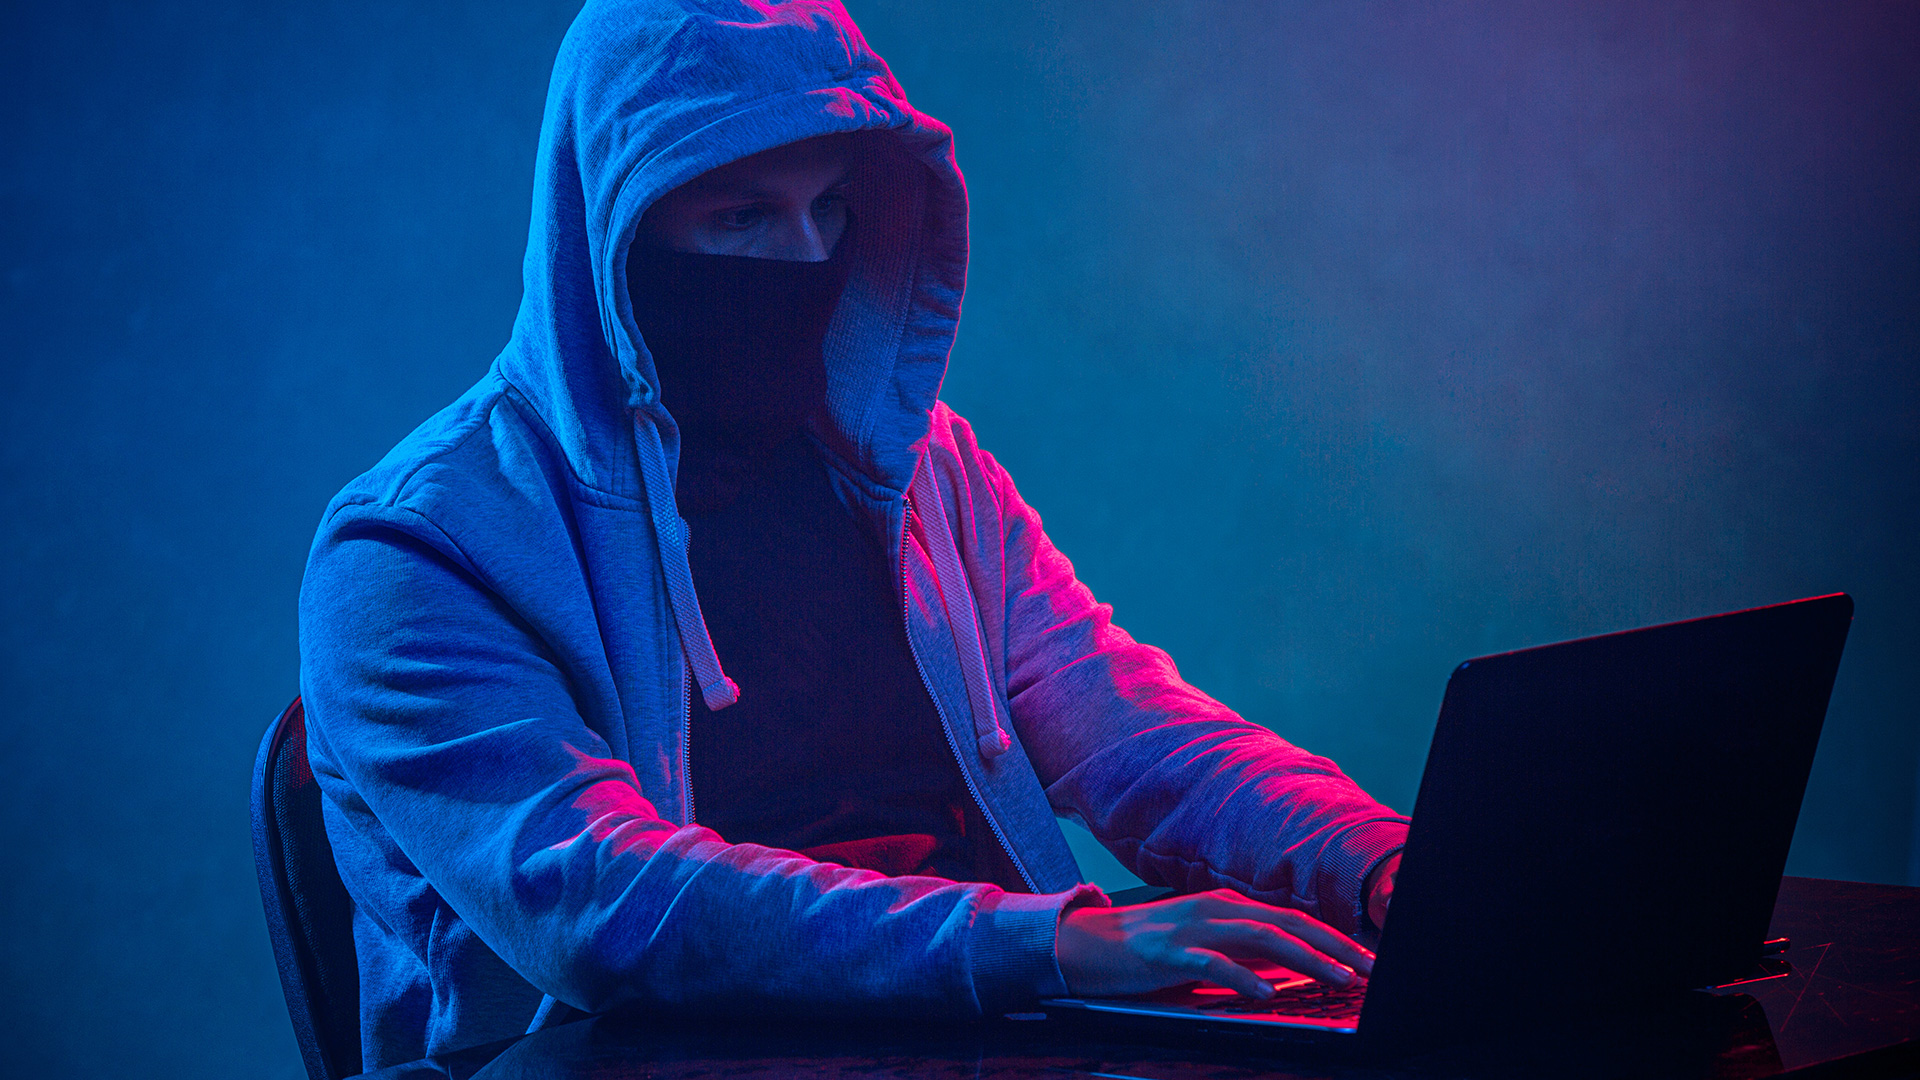 Homeworking creates new opportunities for cyber criminals, research finds